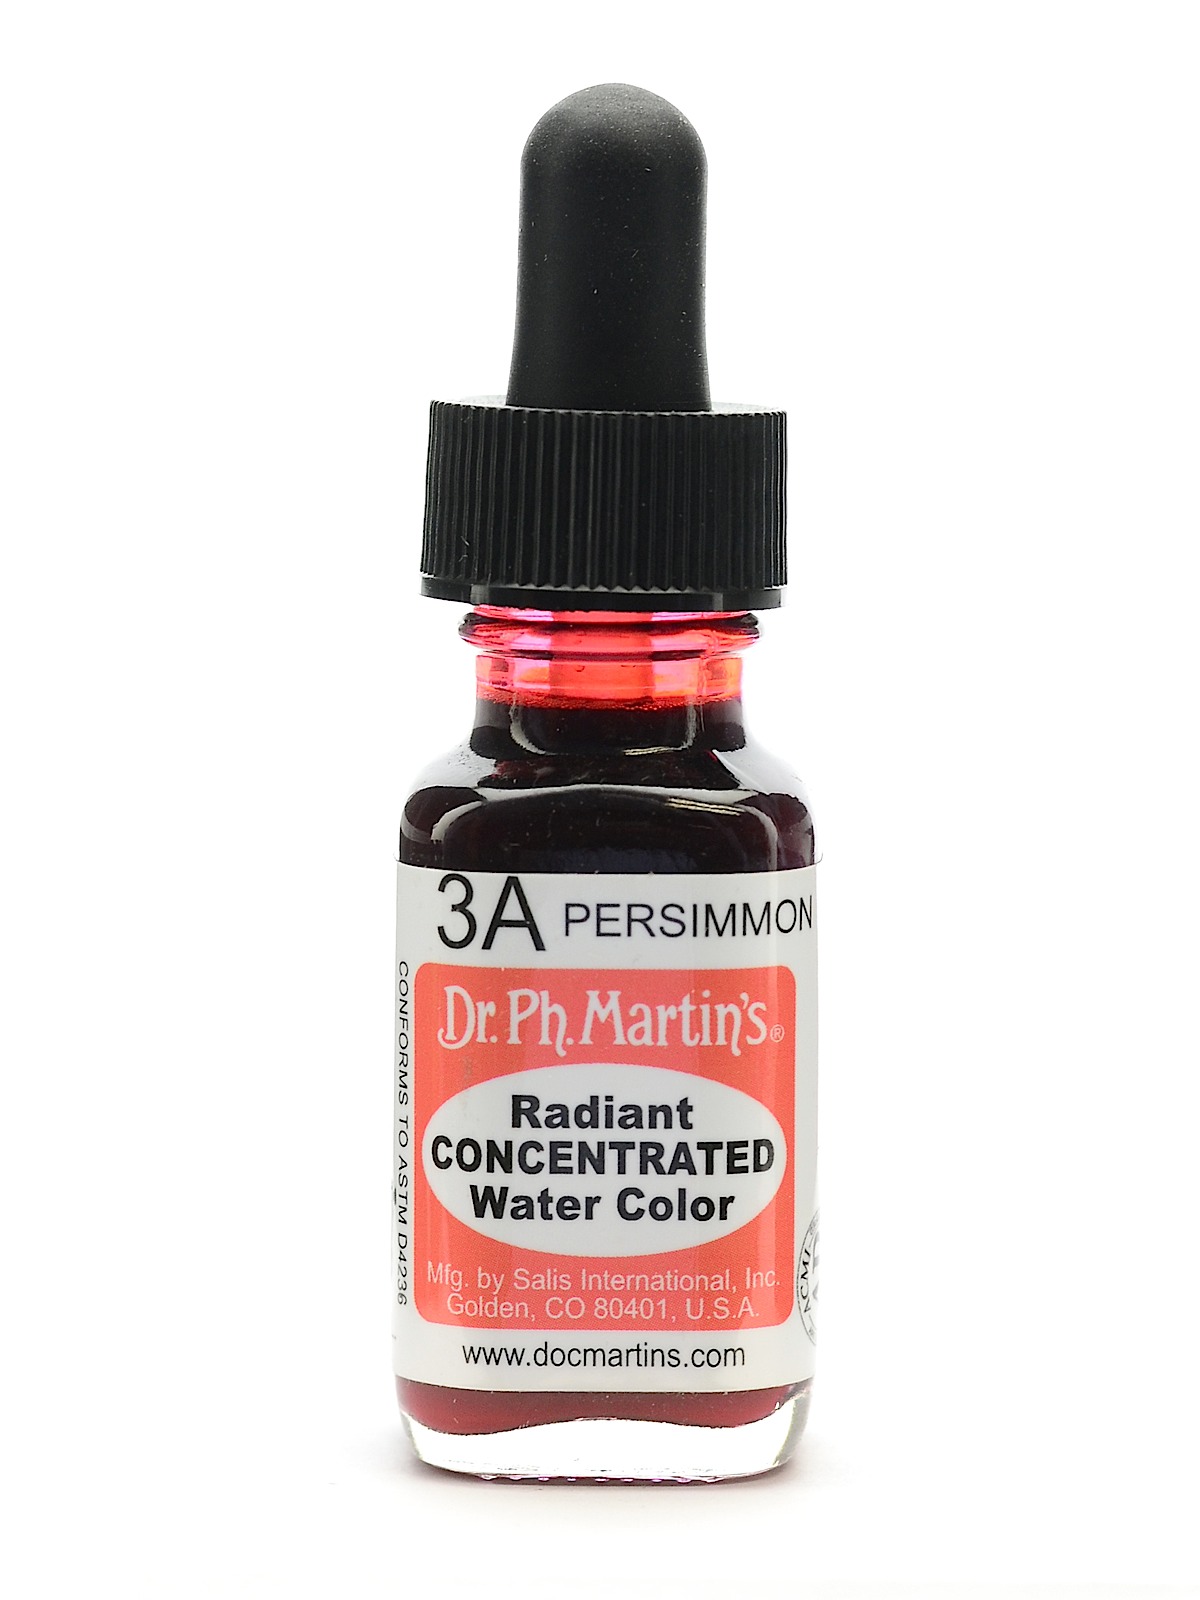 Radiant Concentrated Watercolors Persimmon 1 2 Oz.